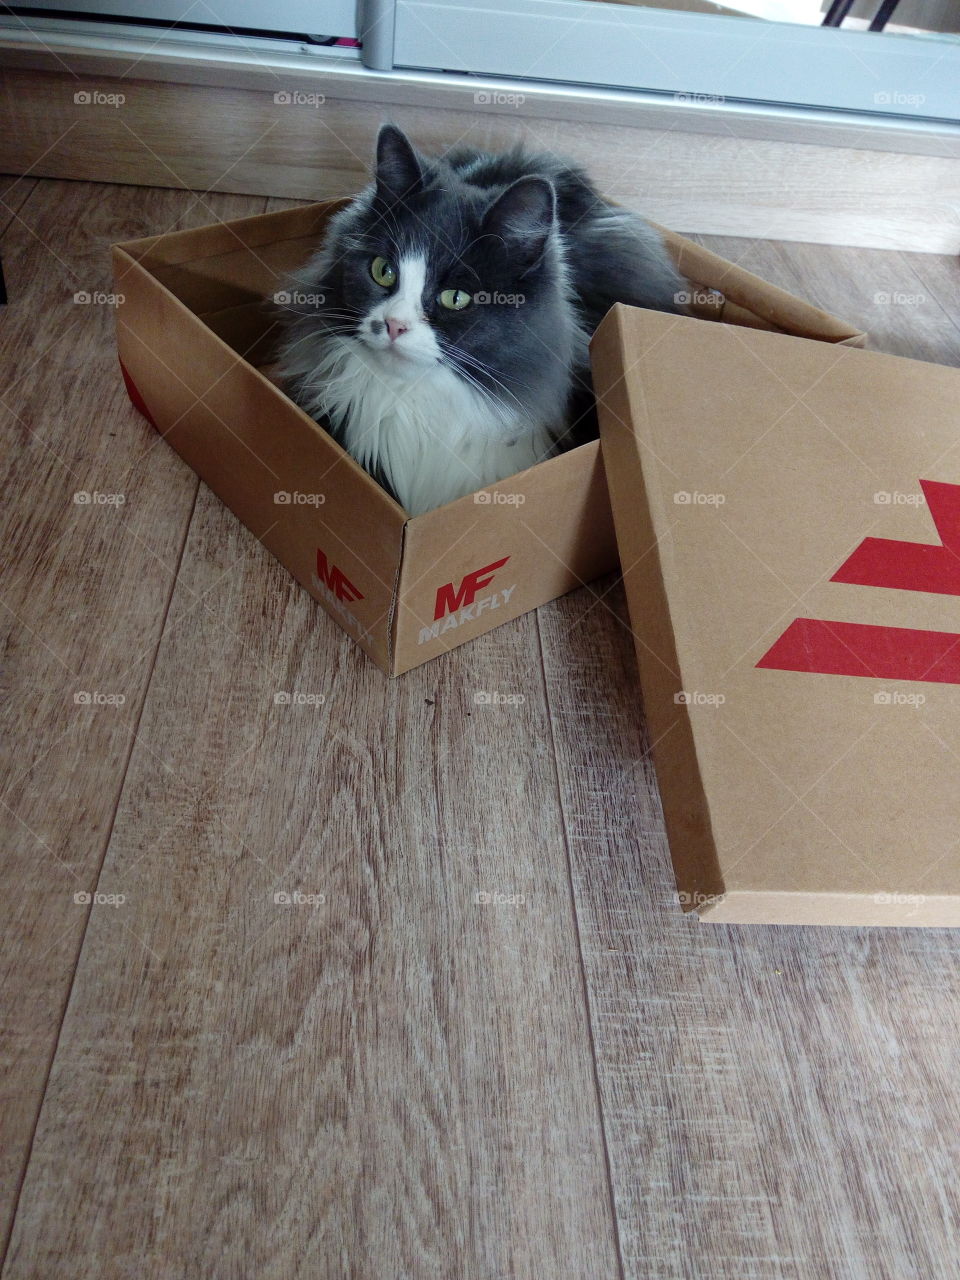 cat in the shoe box. the cat is hiding in the box